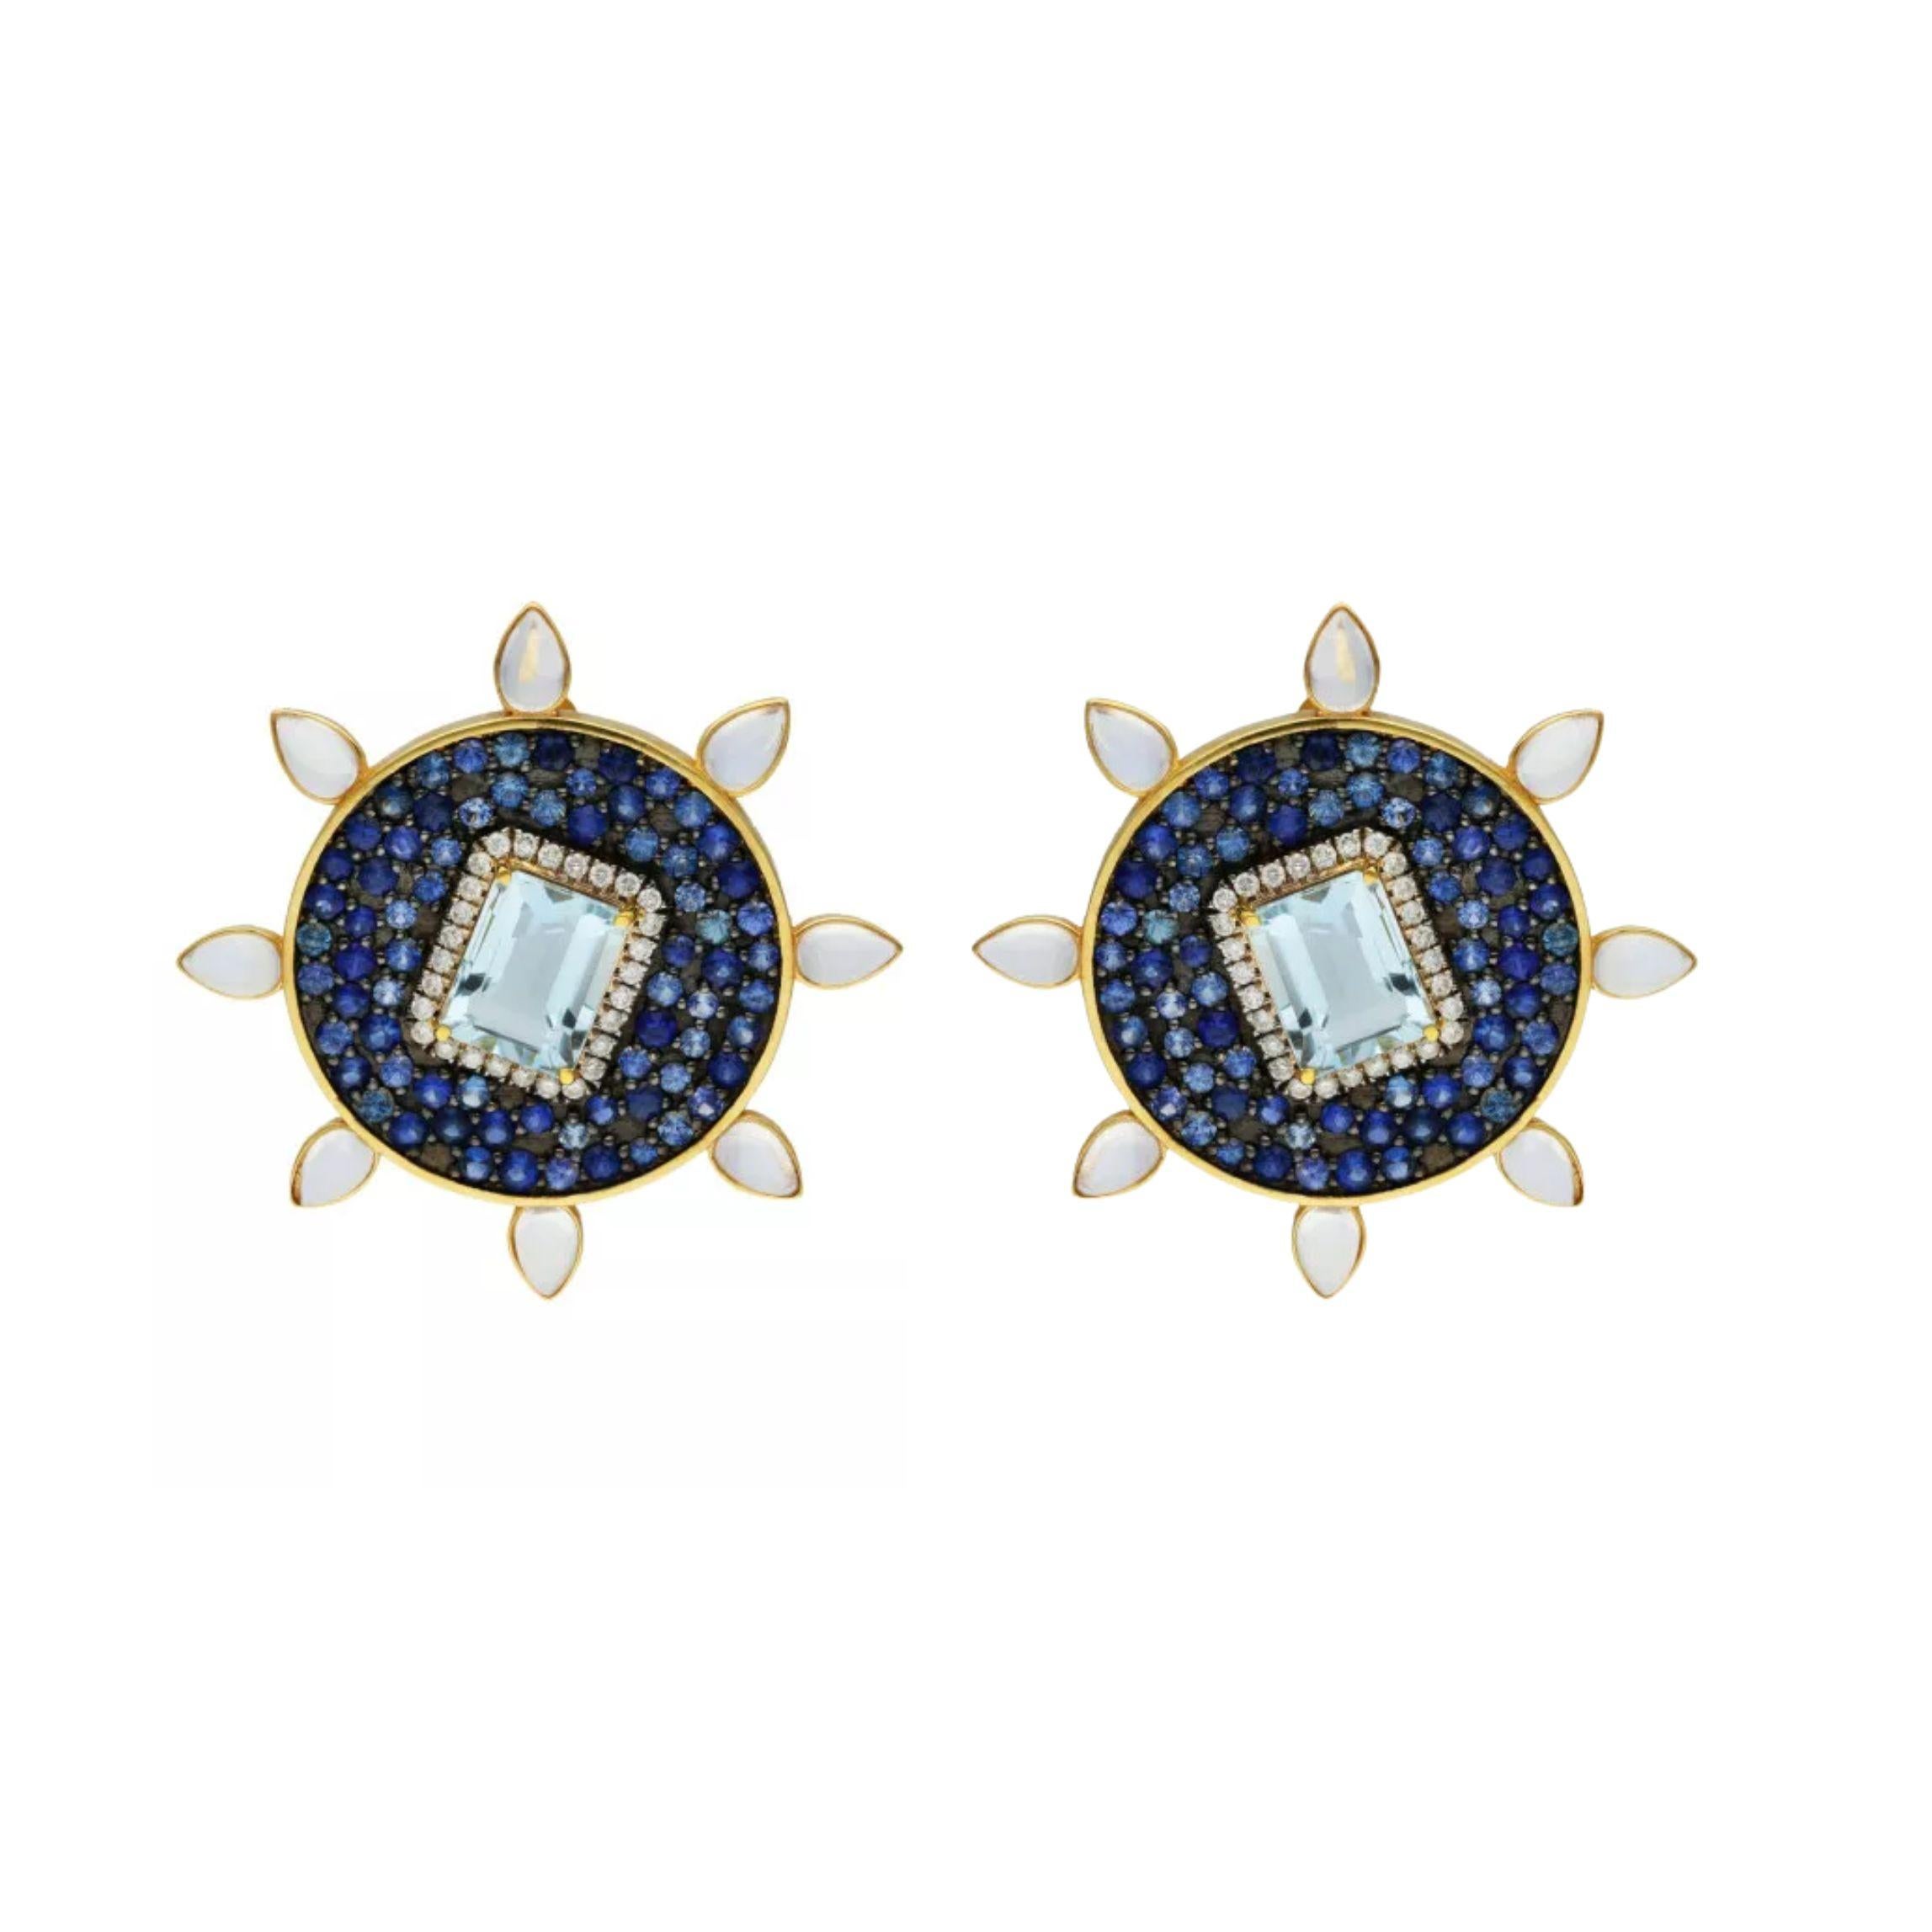 Fei Liu 18ct Yellow Gold Aquamarine, Sapphire & Diamond Earrings

Our Pre-loved 18ct Yellow Gold Gem Set Stud Earrings exude timeless elegance and exquisite craftsmanship. Each earring features a mesmerising disc of 18ct yellow gold, creating a